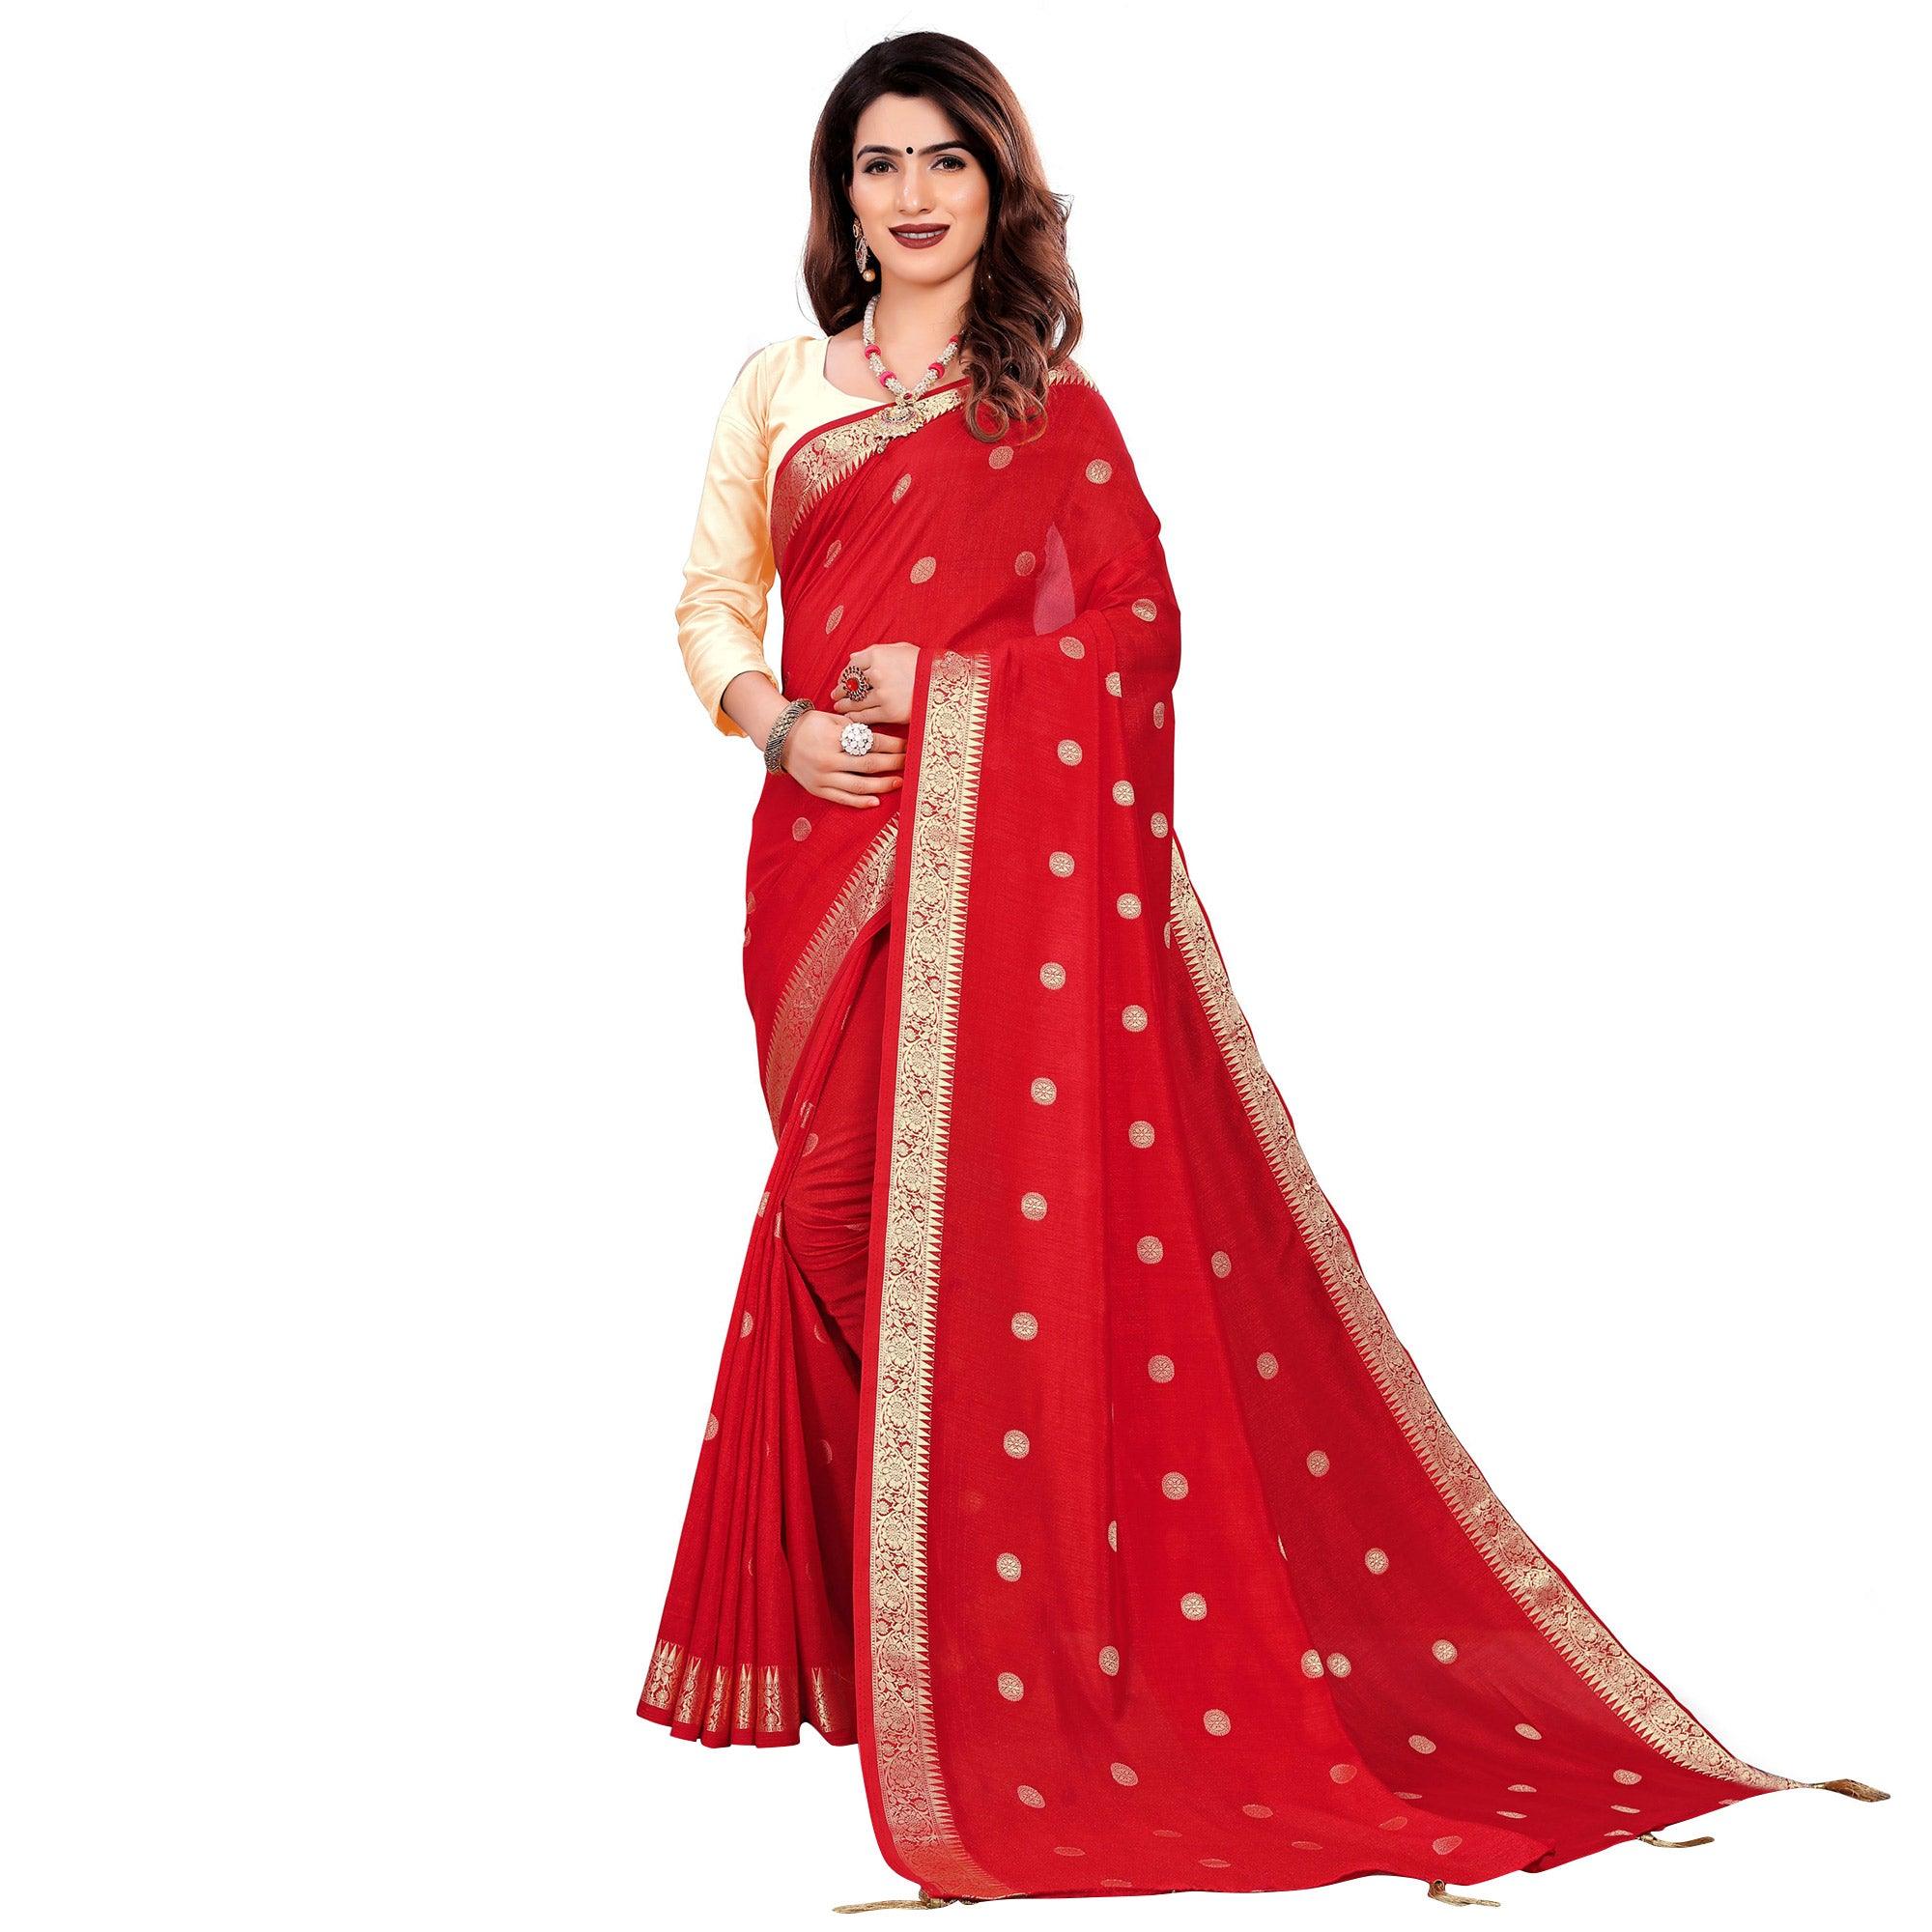 Blooming Red Colored Casual Wear Embroidered Art Silk Saree With Tassels - Peachmode